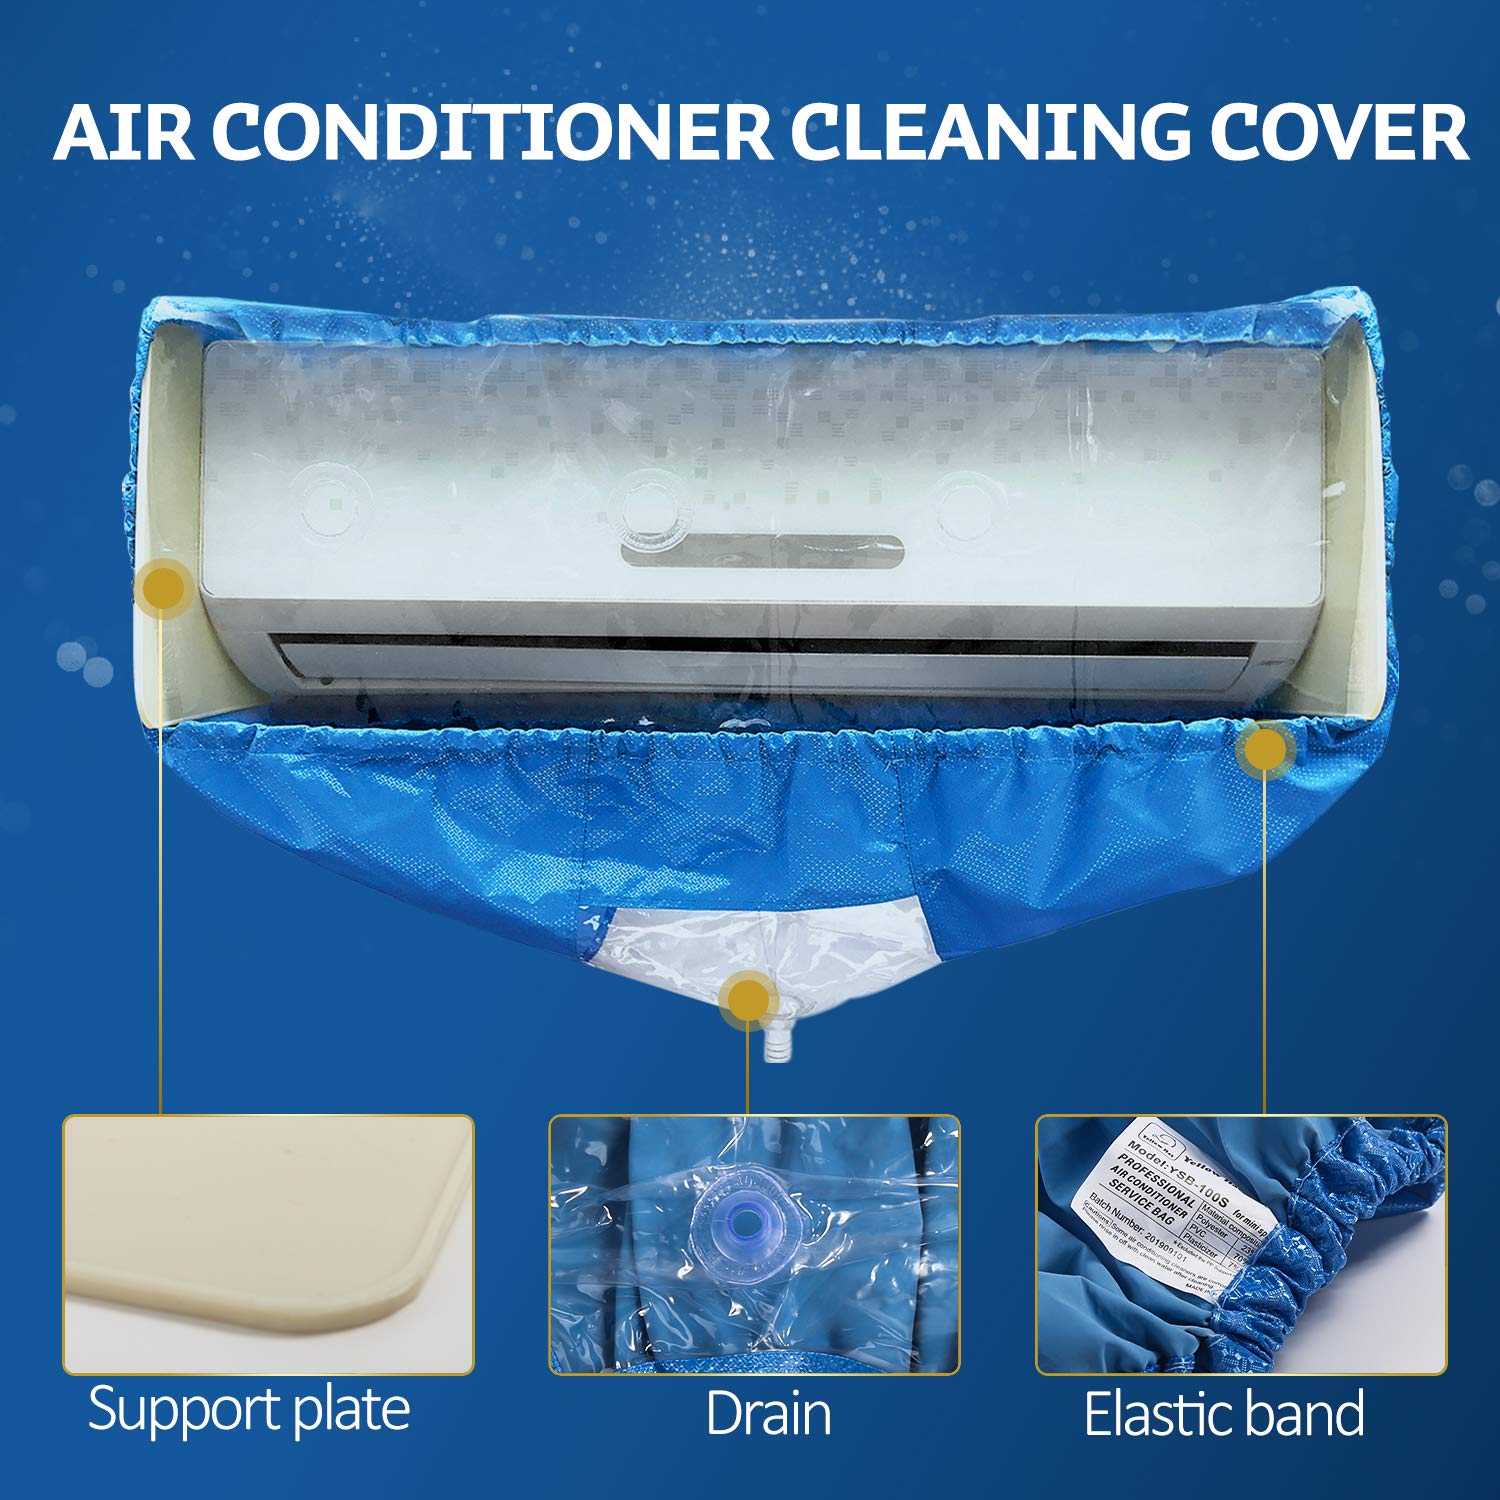 Split Air Conditioning Cleaning Waterproof Cover Bag with Drain Outlet and Two Sides Support Plates Dust Washing Clean Protector Bag Wall Mounted Air Conditioning Service Bag with Water Pipe